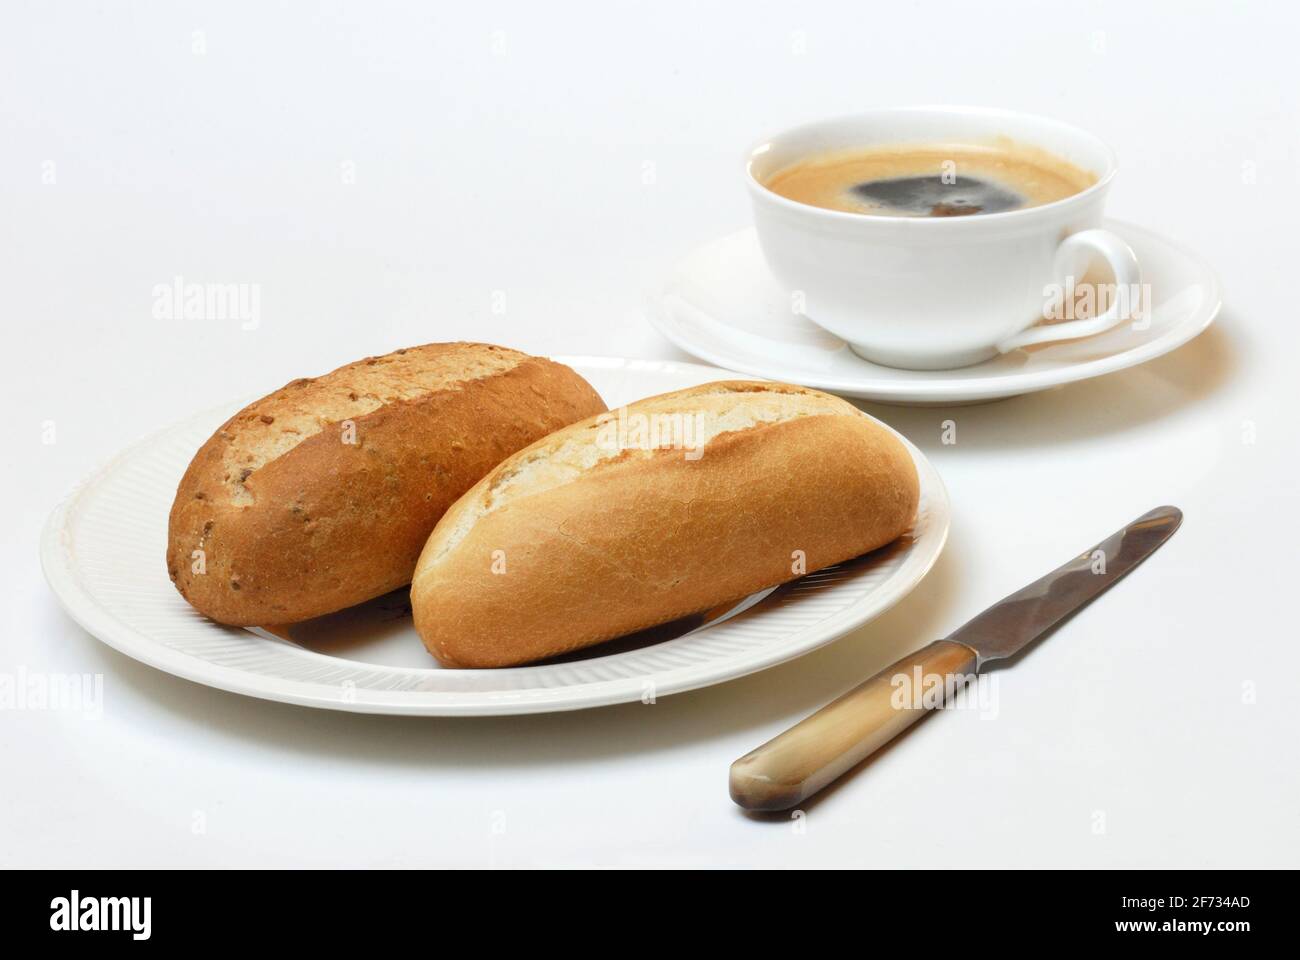 Breakfast, bread roll and cup of coffee, bread roll, knife Stock Photo